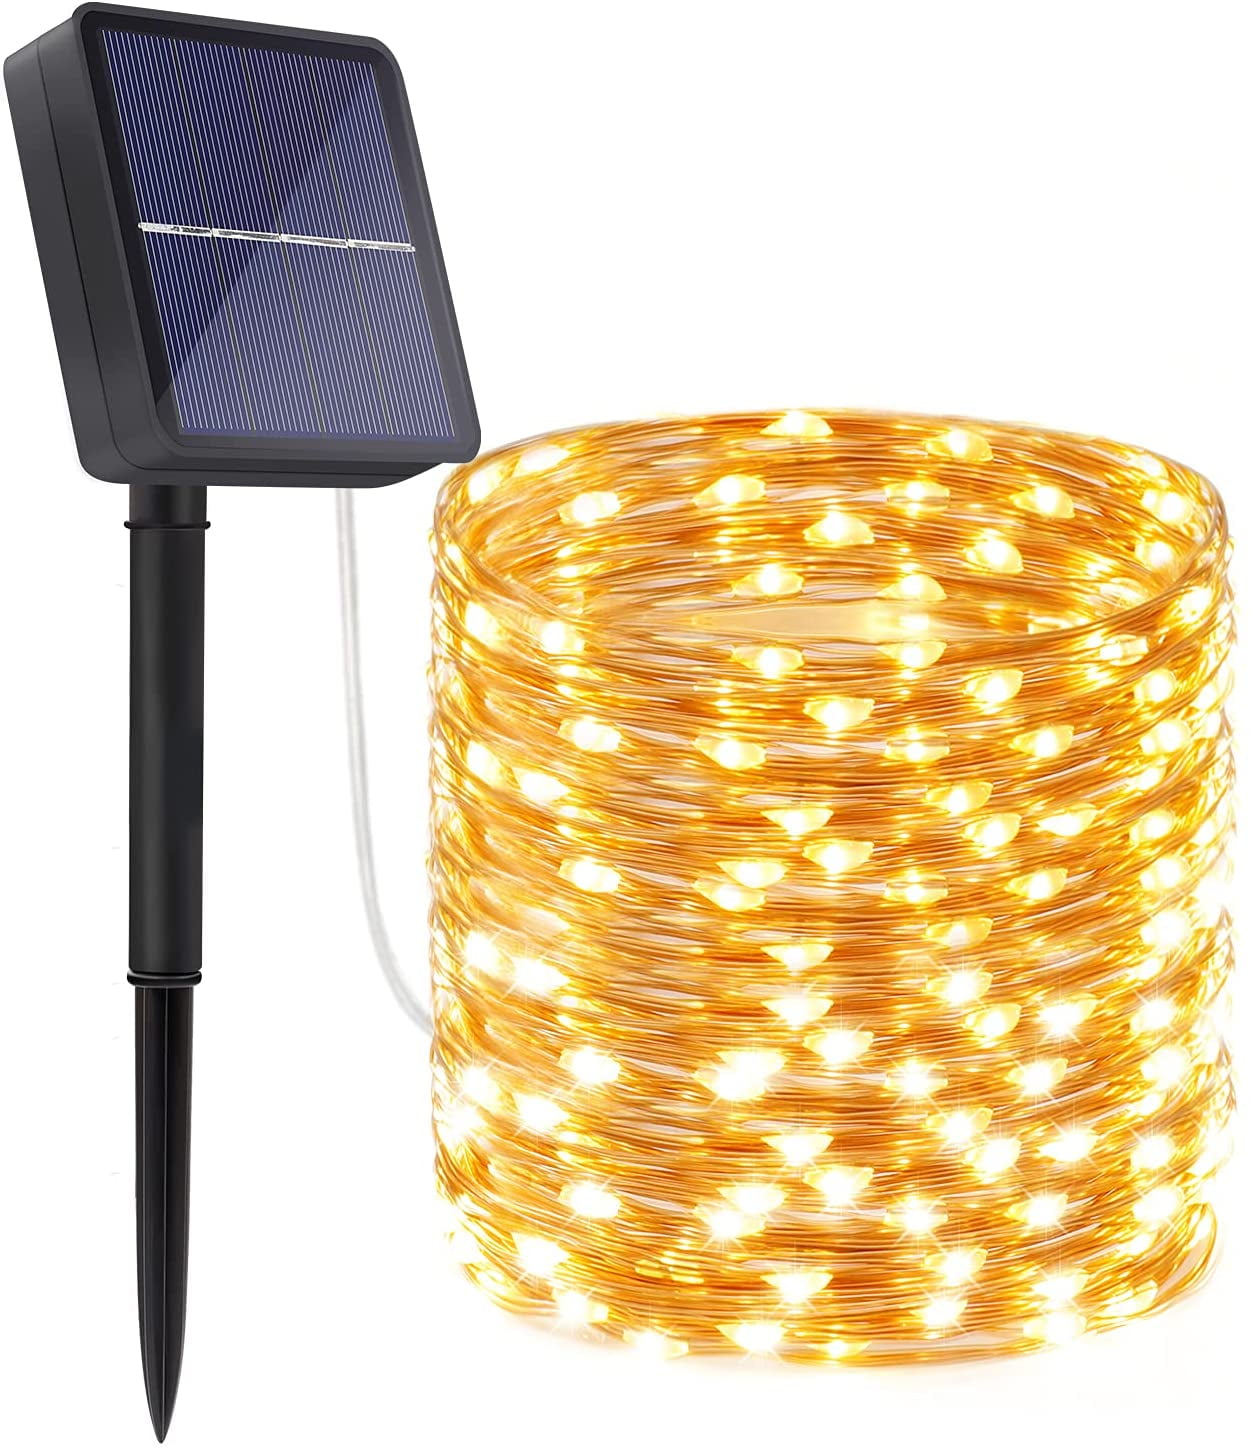 Solar Powered 30 LED String Light Garden Patio Yard Landscape Lamp Party Outdoor 